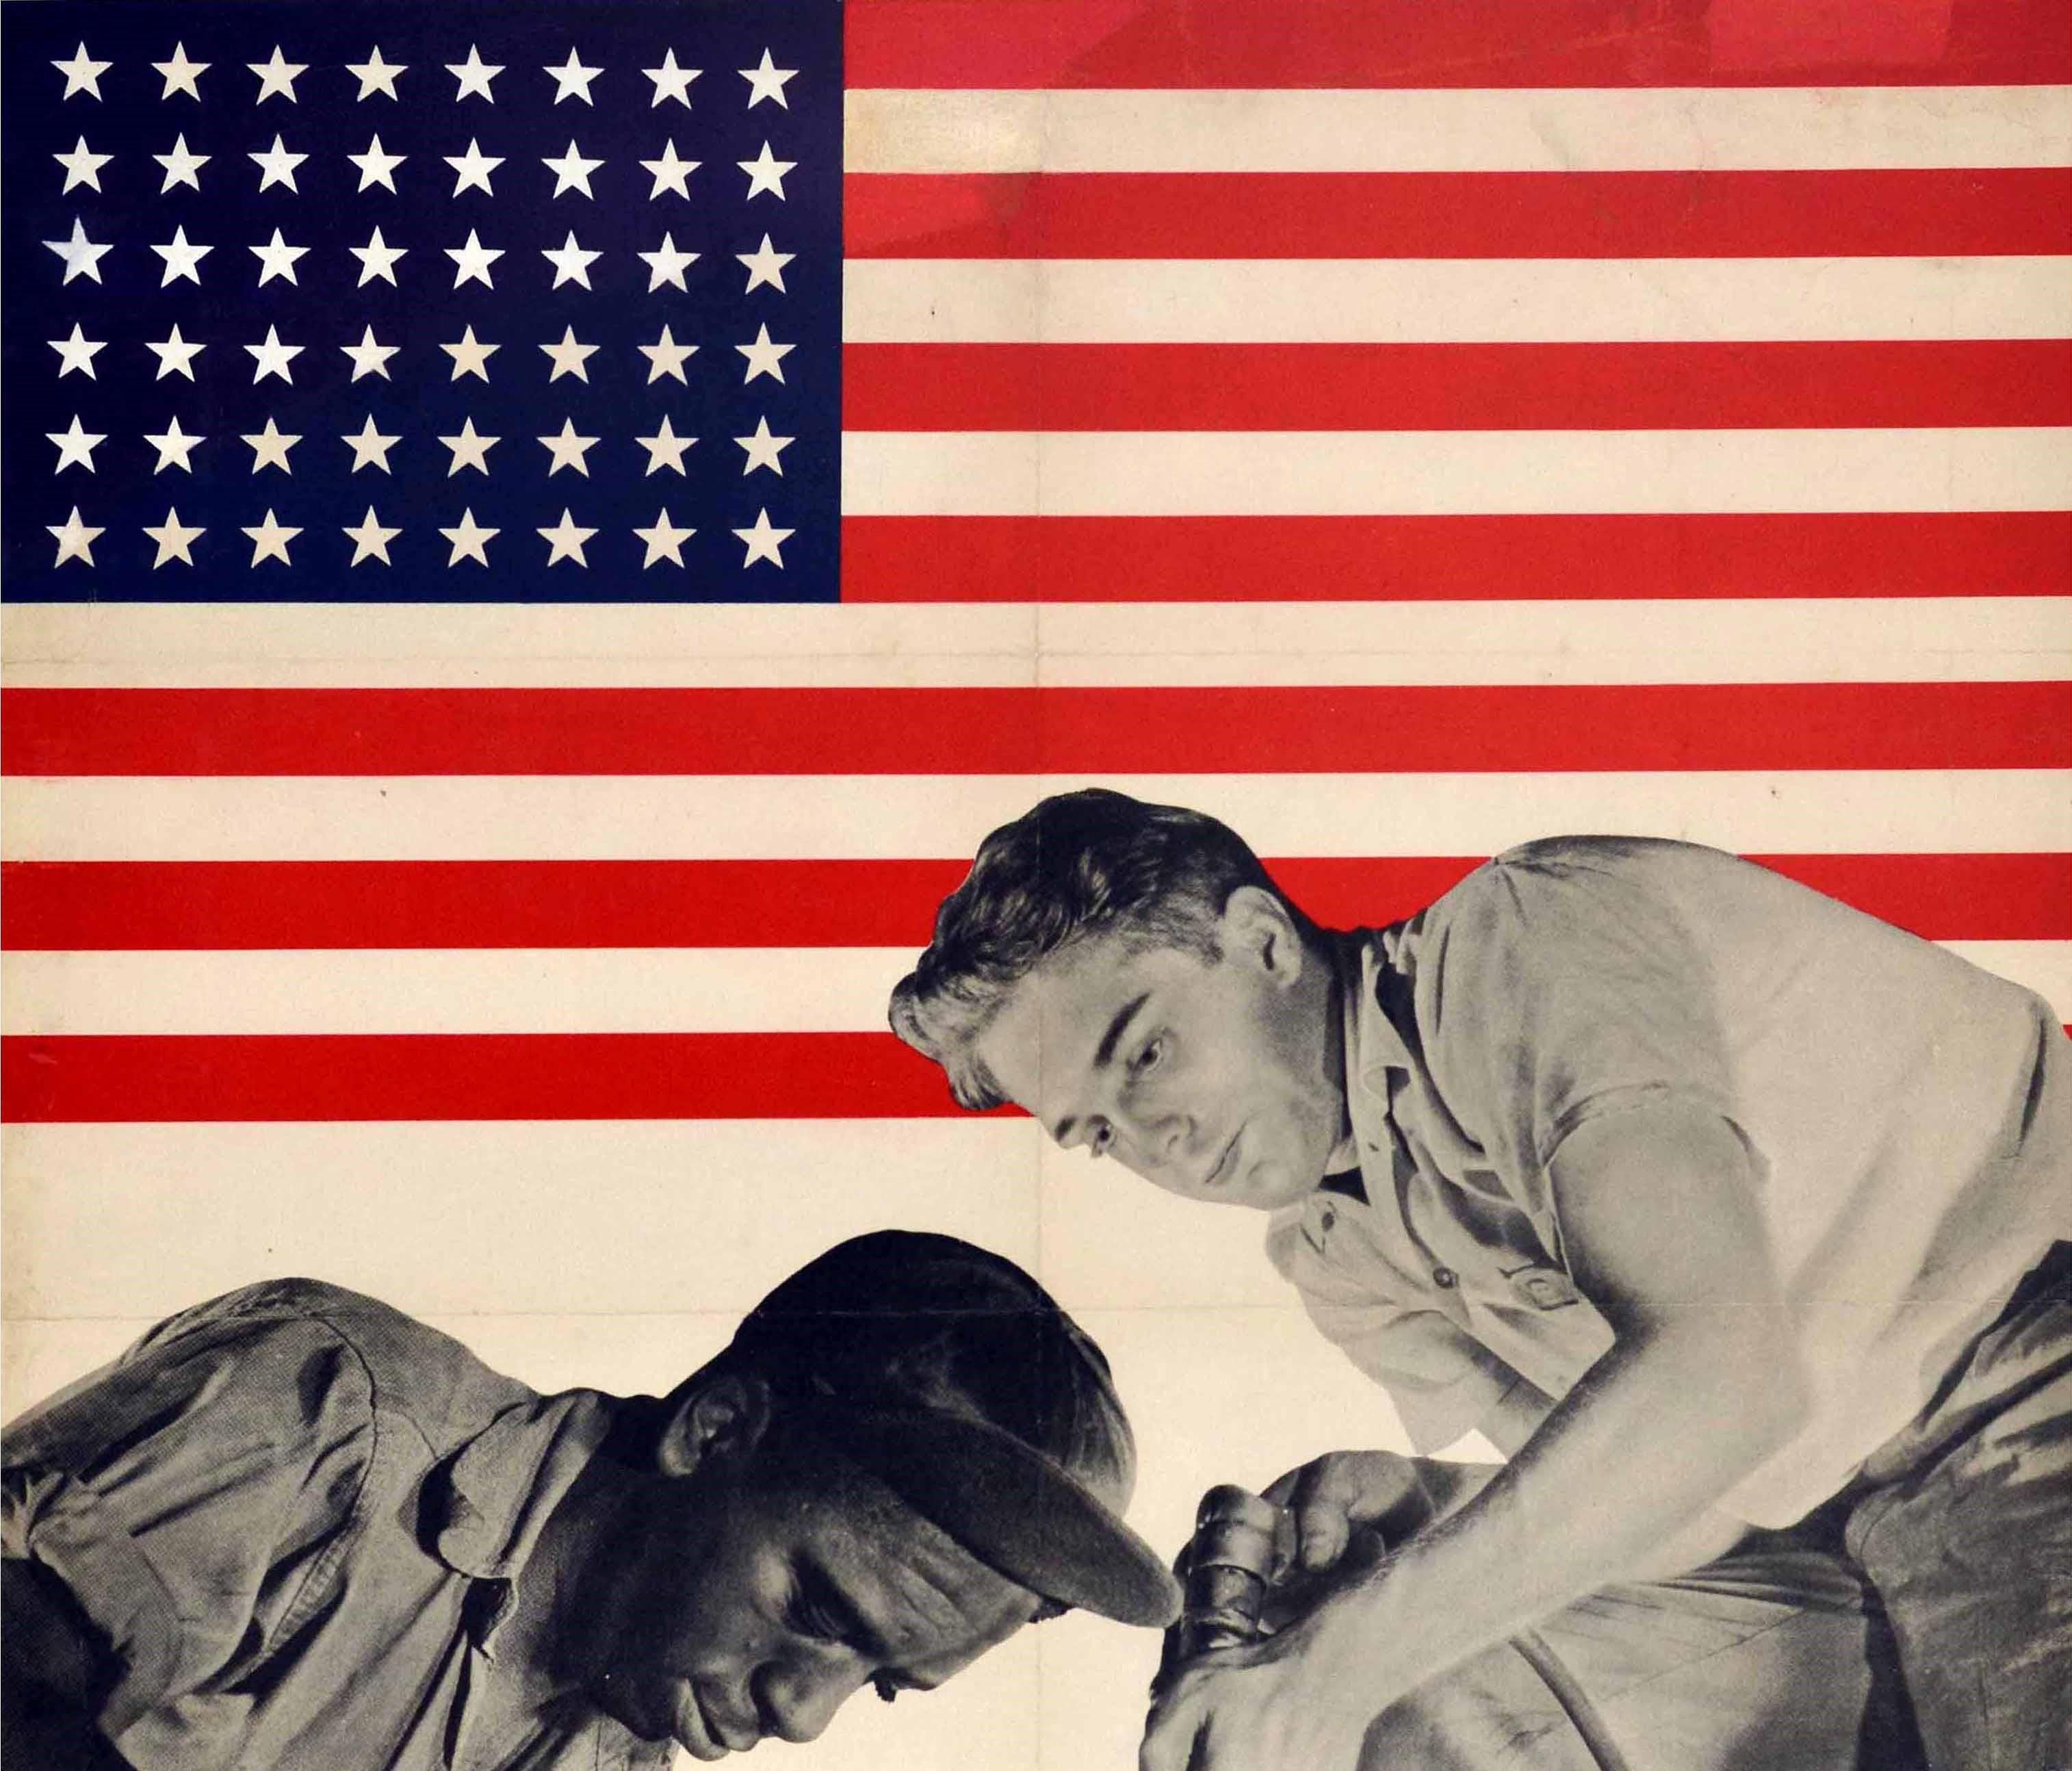 Original vintage World War Two propaganda poster issued by the War Manpower Commission promoting racial solidarity among wartime workers featuring a black and white photograph of two factory workers working together at an integrated aircraft plant